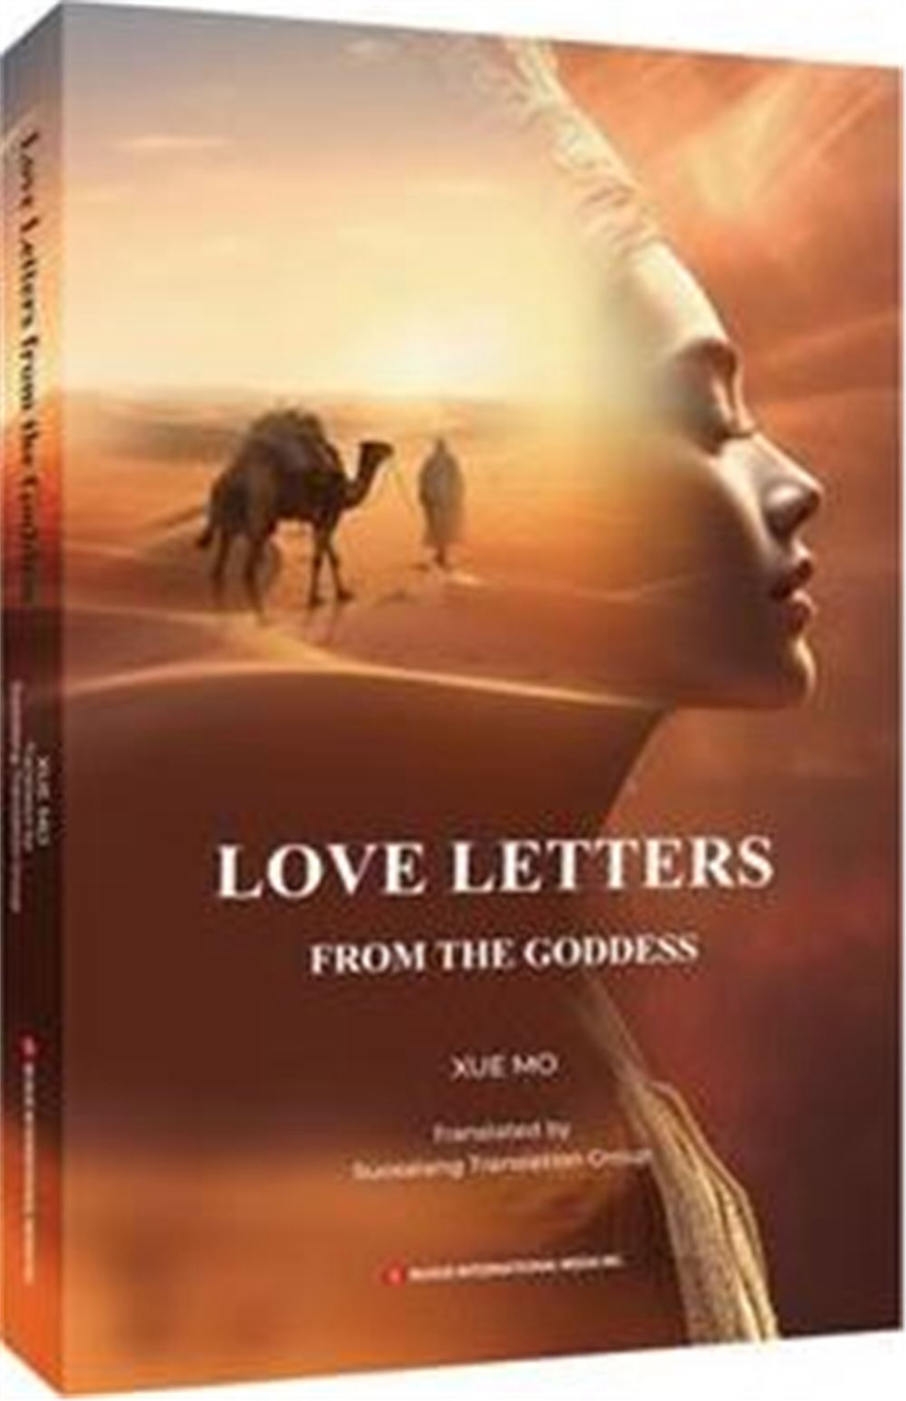 LOVE LETTERS FROM THE GODDESS